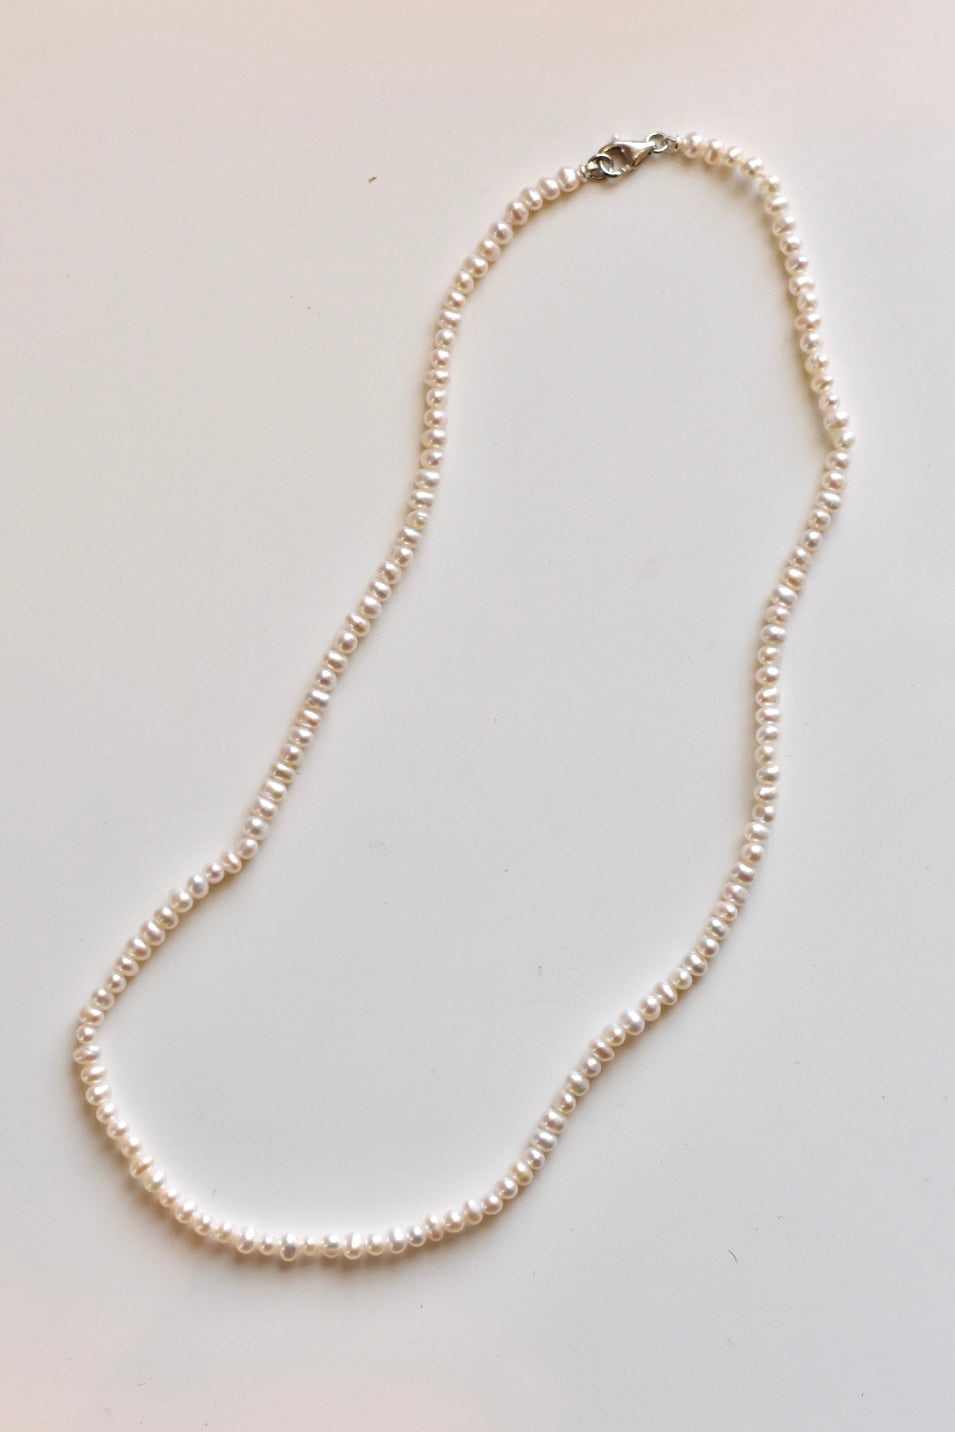 Baby Pearl Necklace, Extra Small Pearls